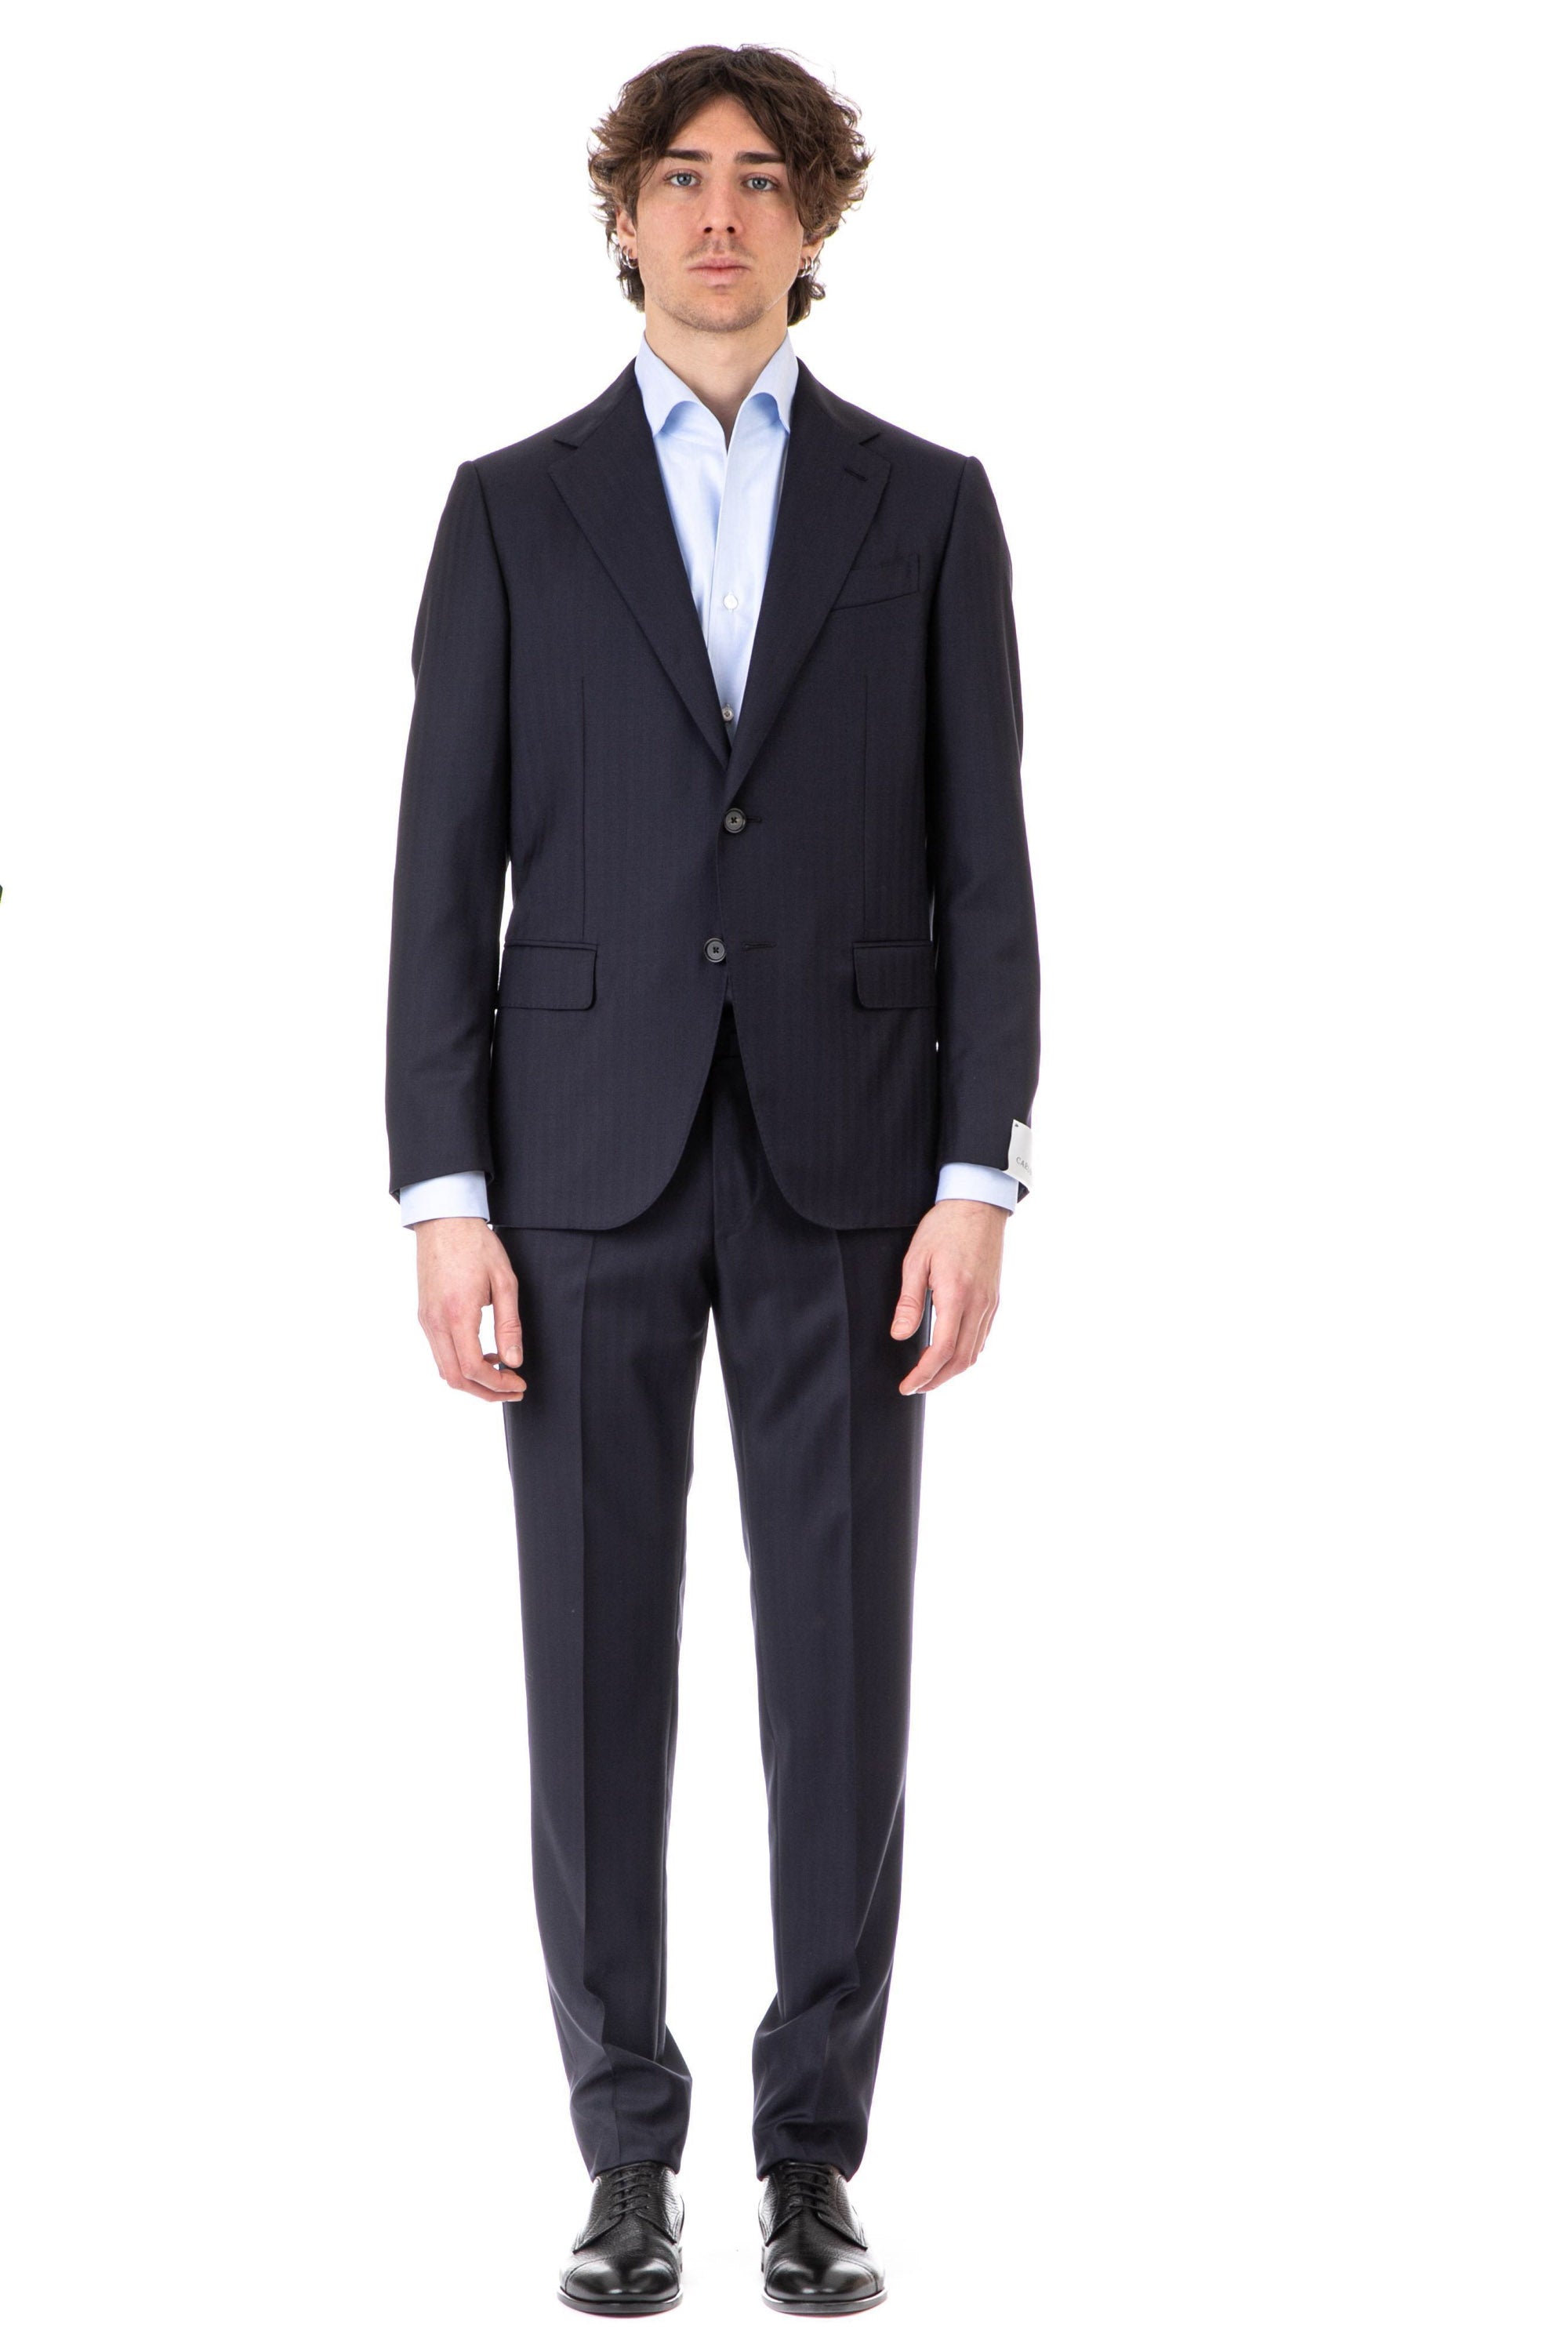 Norma model tailored wool suit